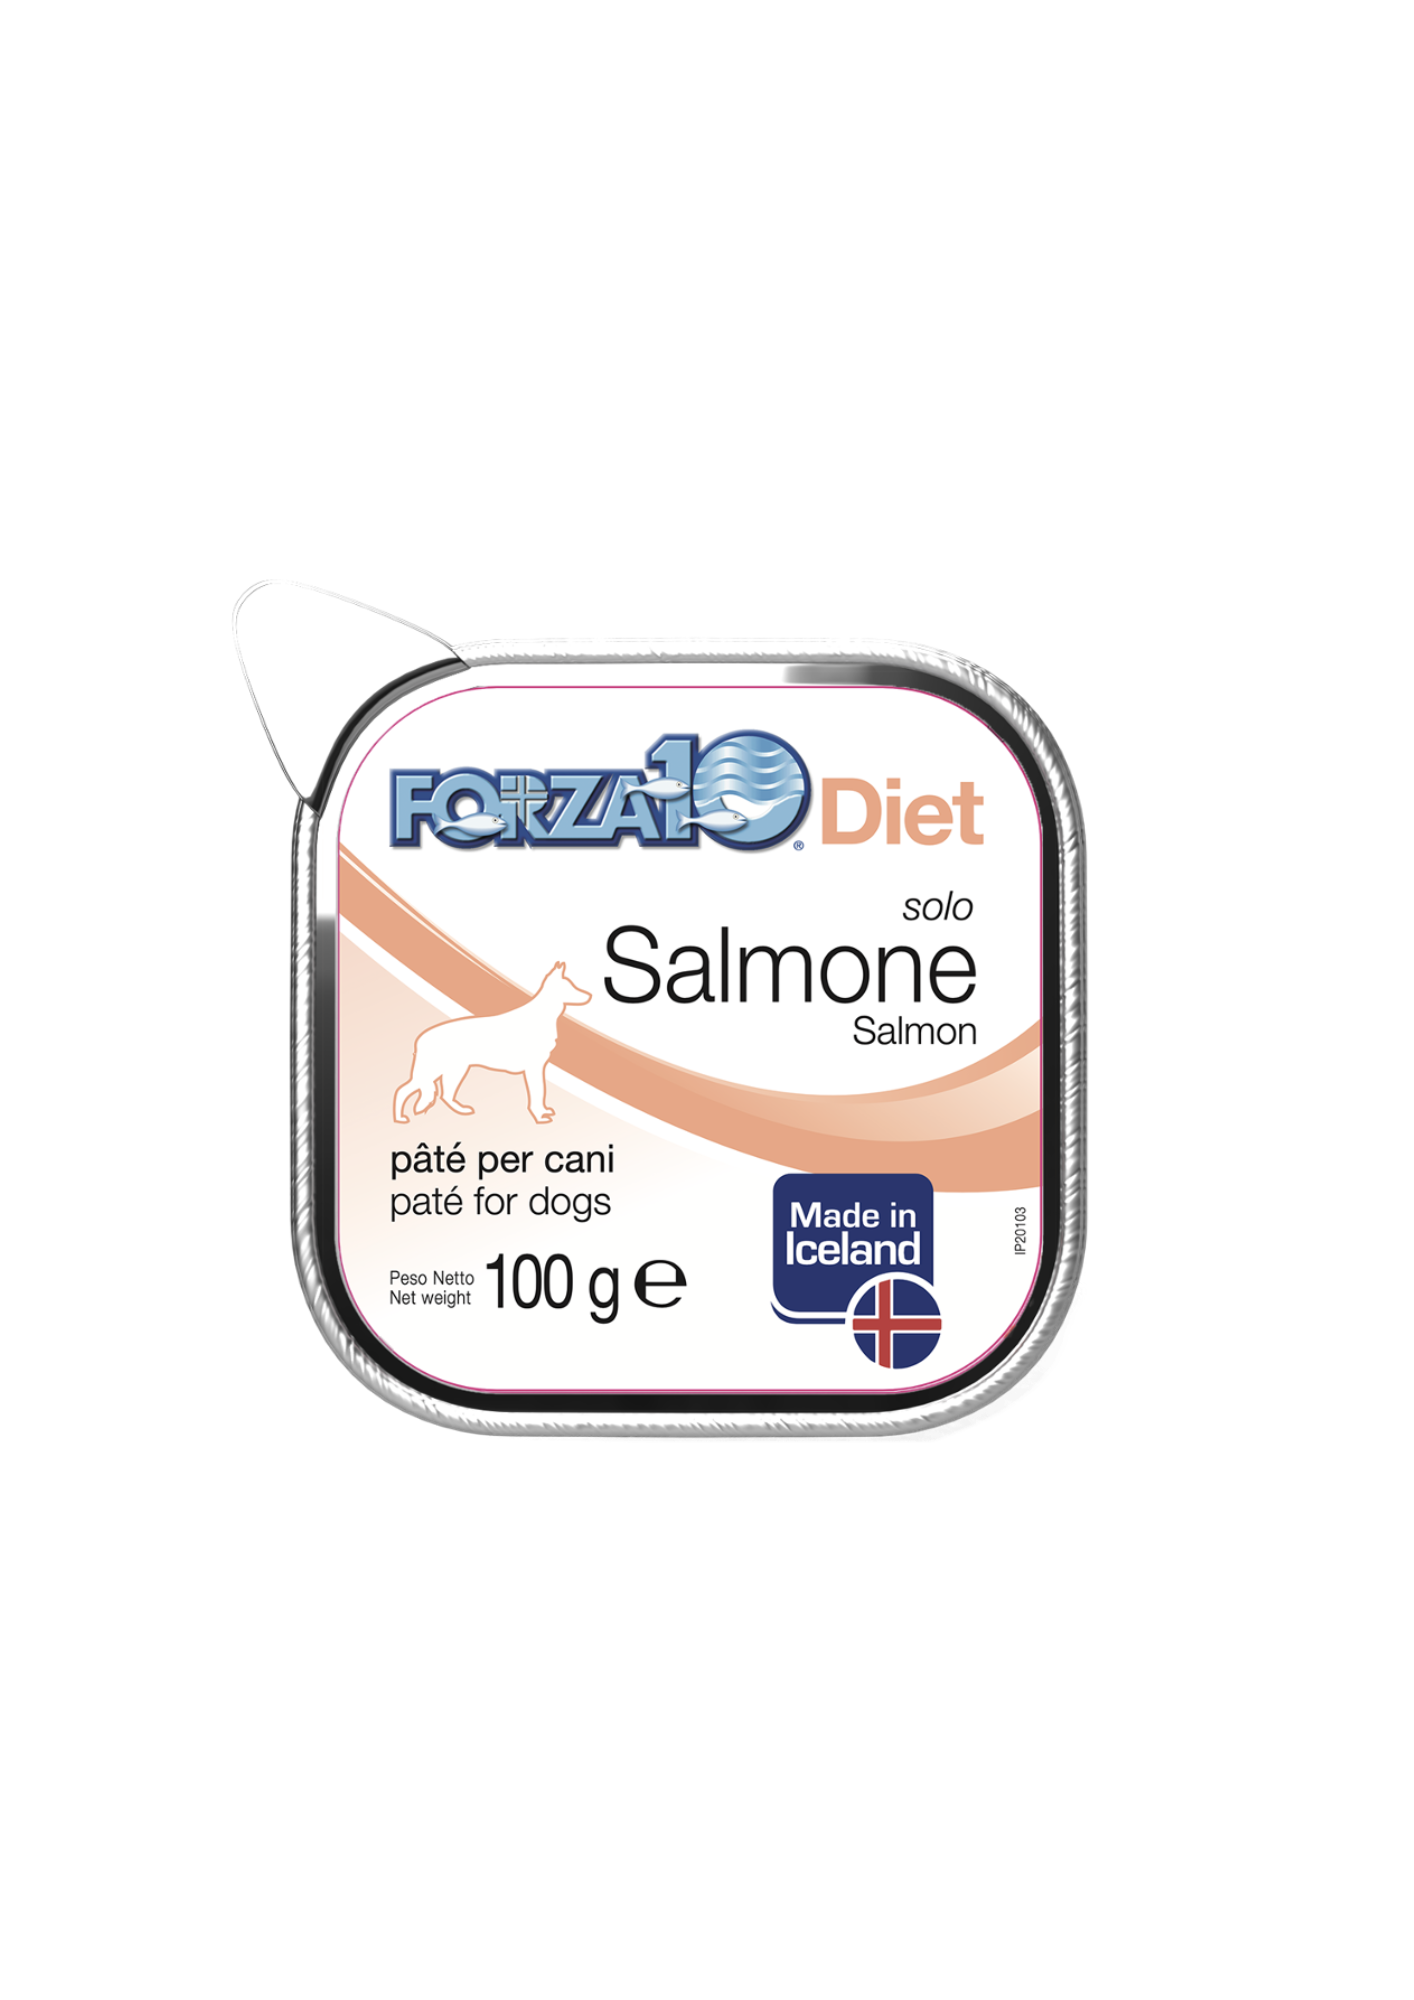 Forza10 Dog Solo Diet Salmon Pate Wet Dog Food, 300g